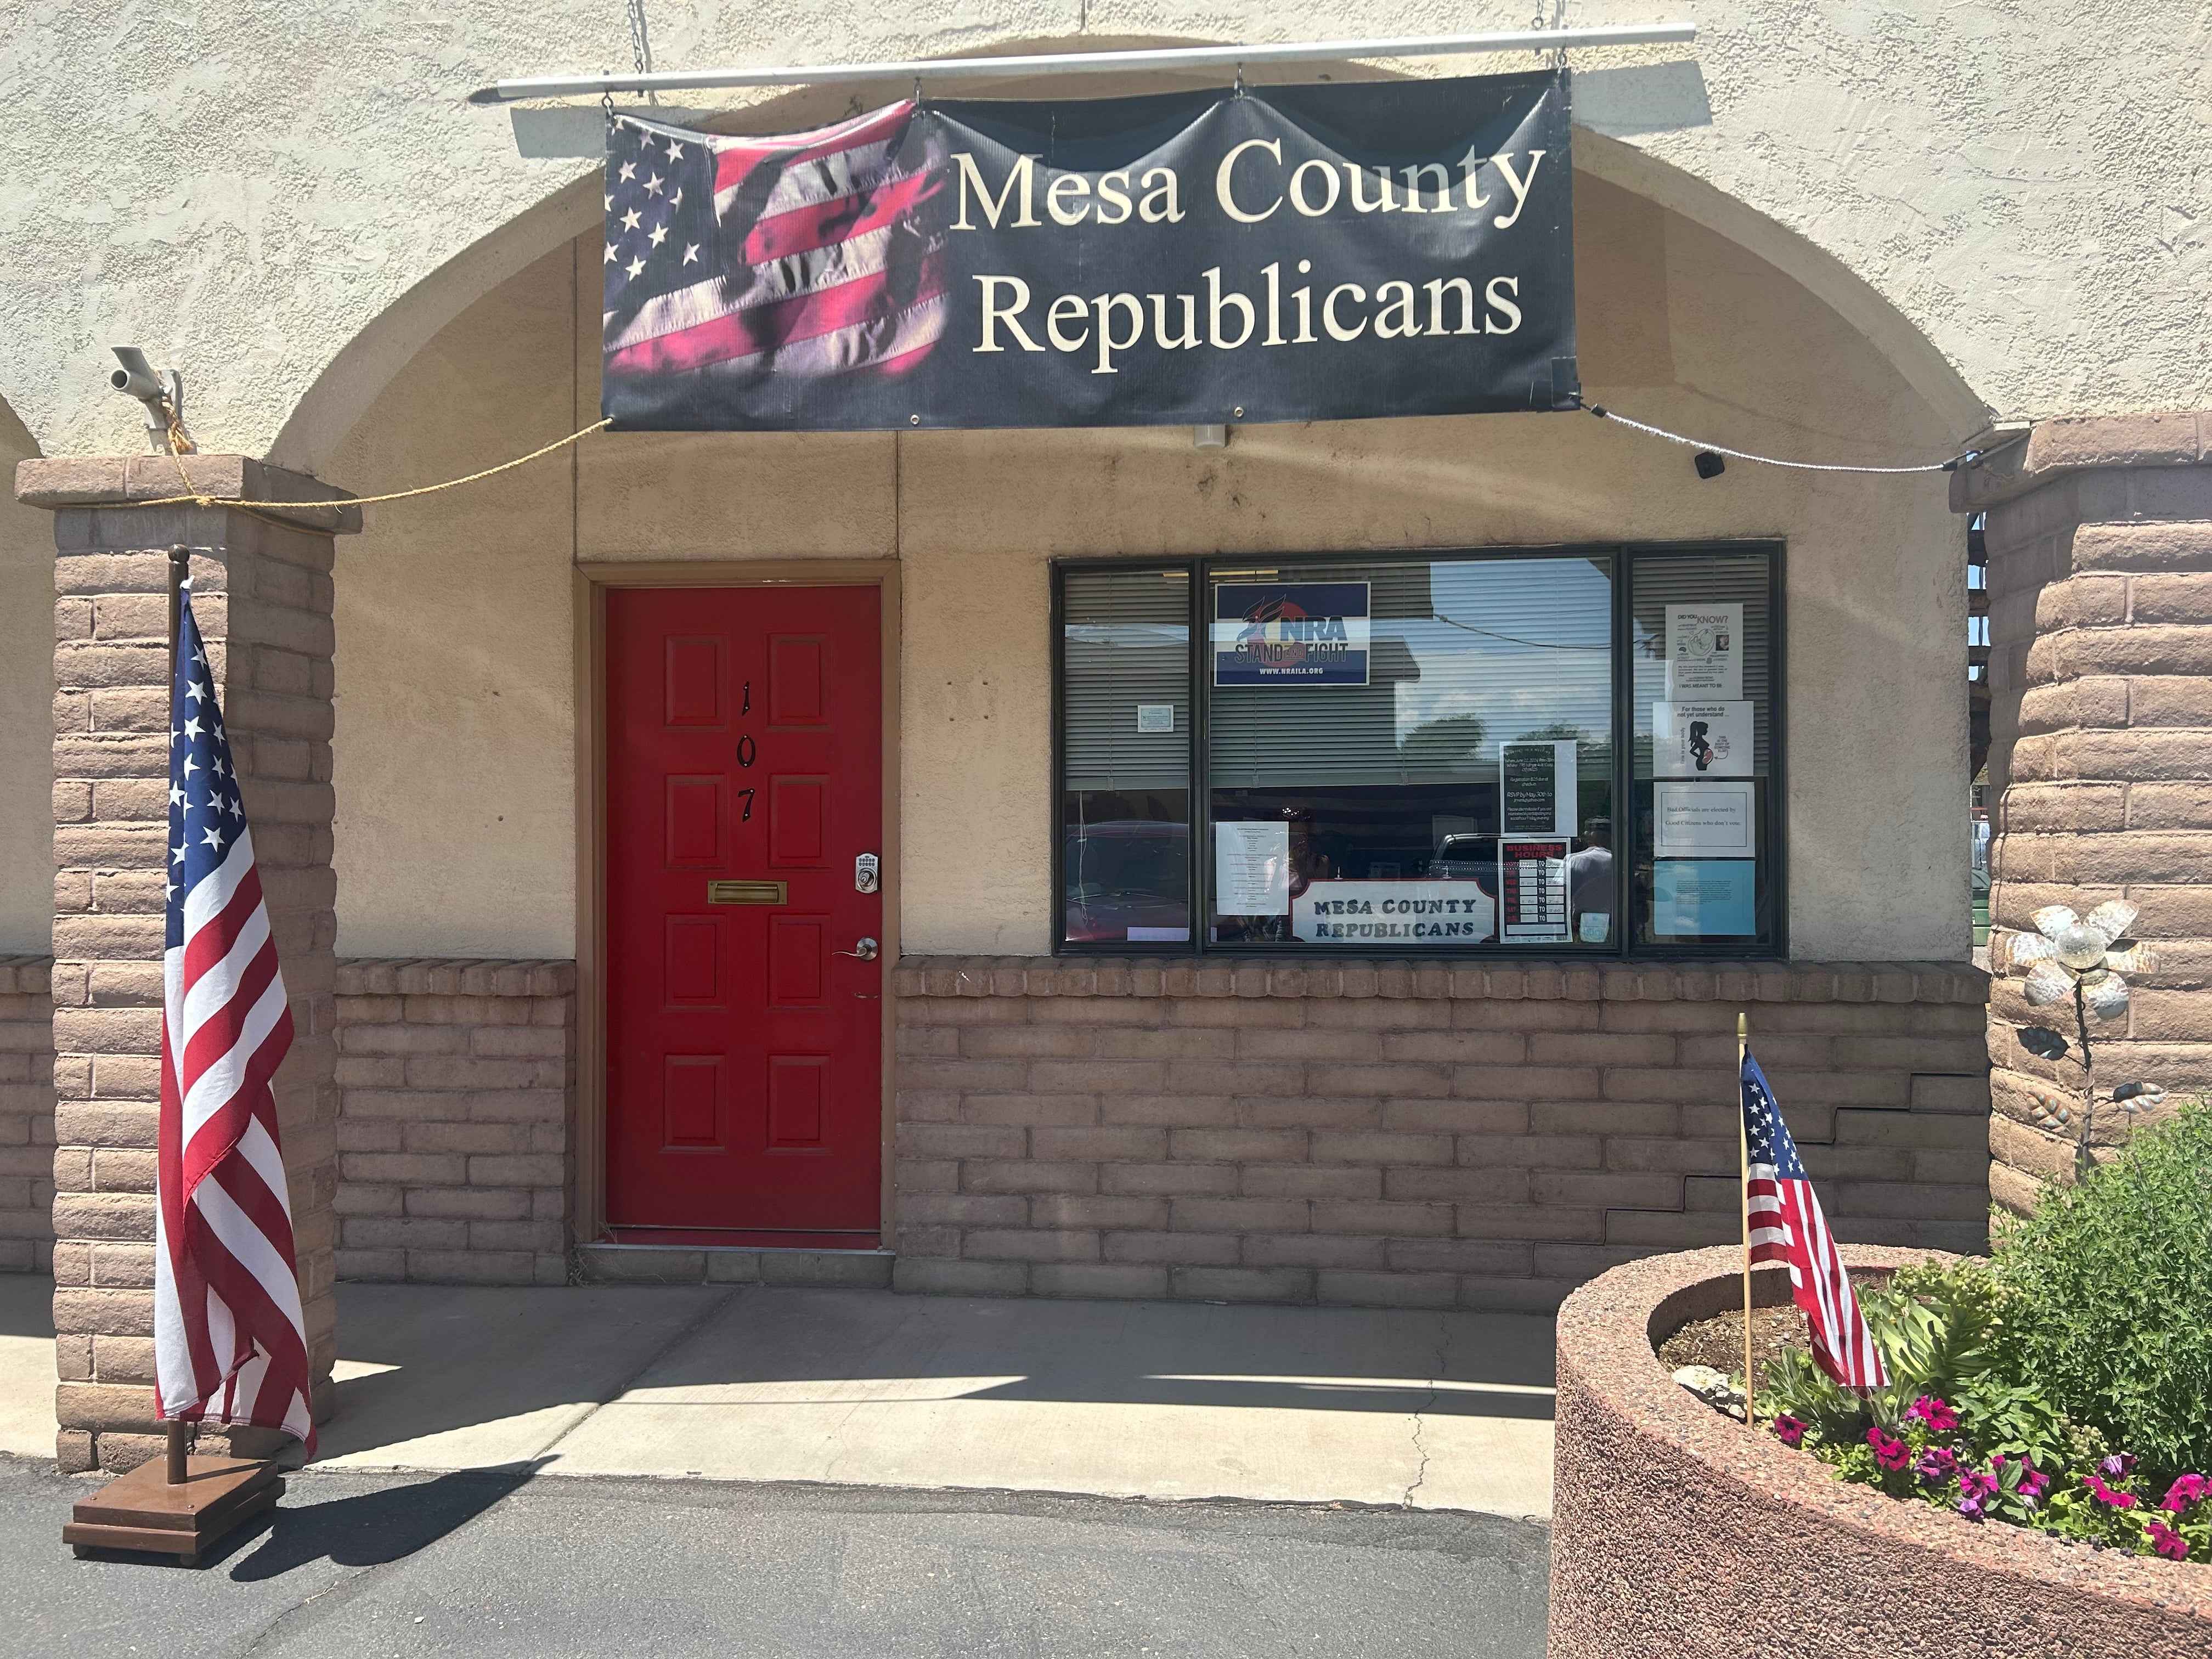 There is infighting within the Colorado state GOP – mirroring national trends – with splits between old-guard establishment Republicans and grassroots, MAGA supporters; at the Mesa County offices in Grand Junction, Trump paraphernalia is overwhelmingly on display